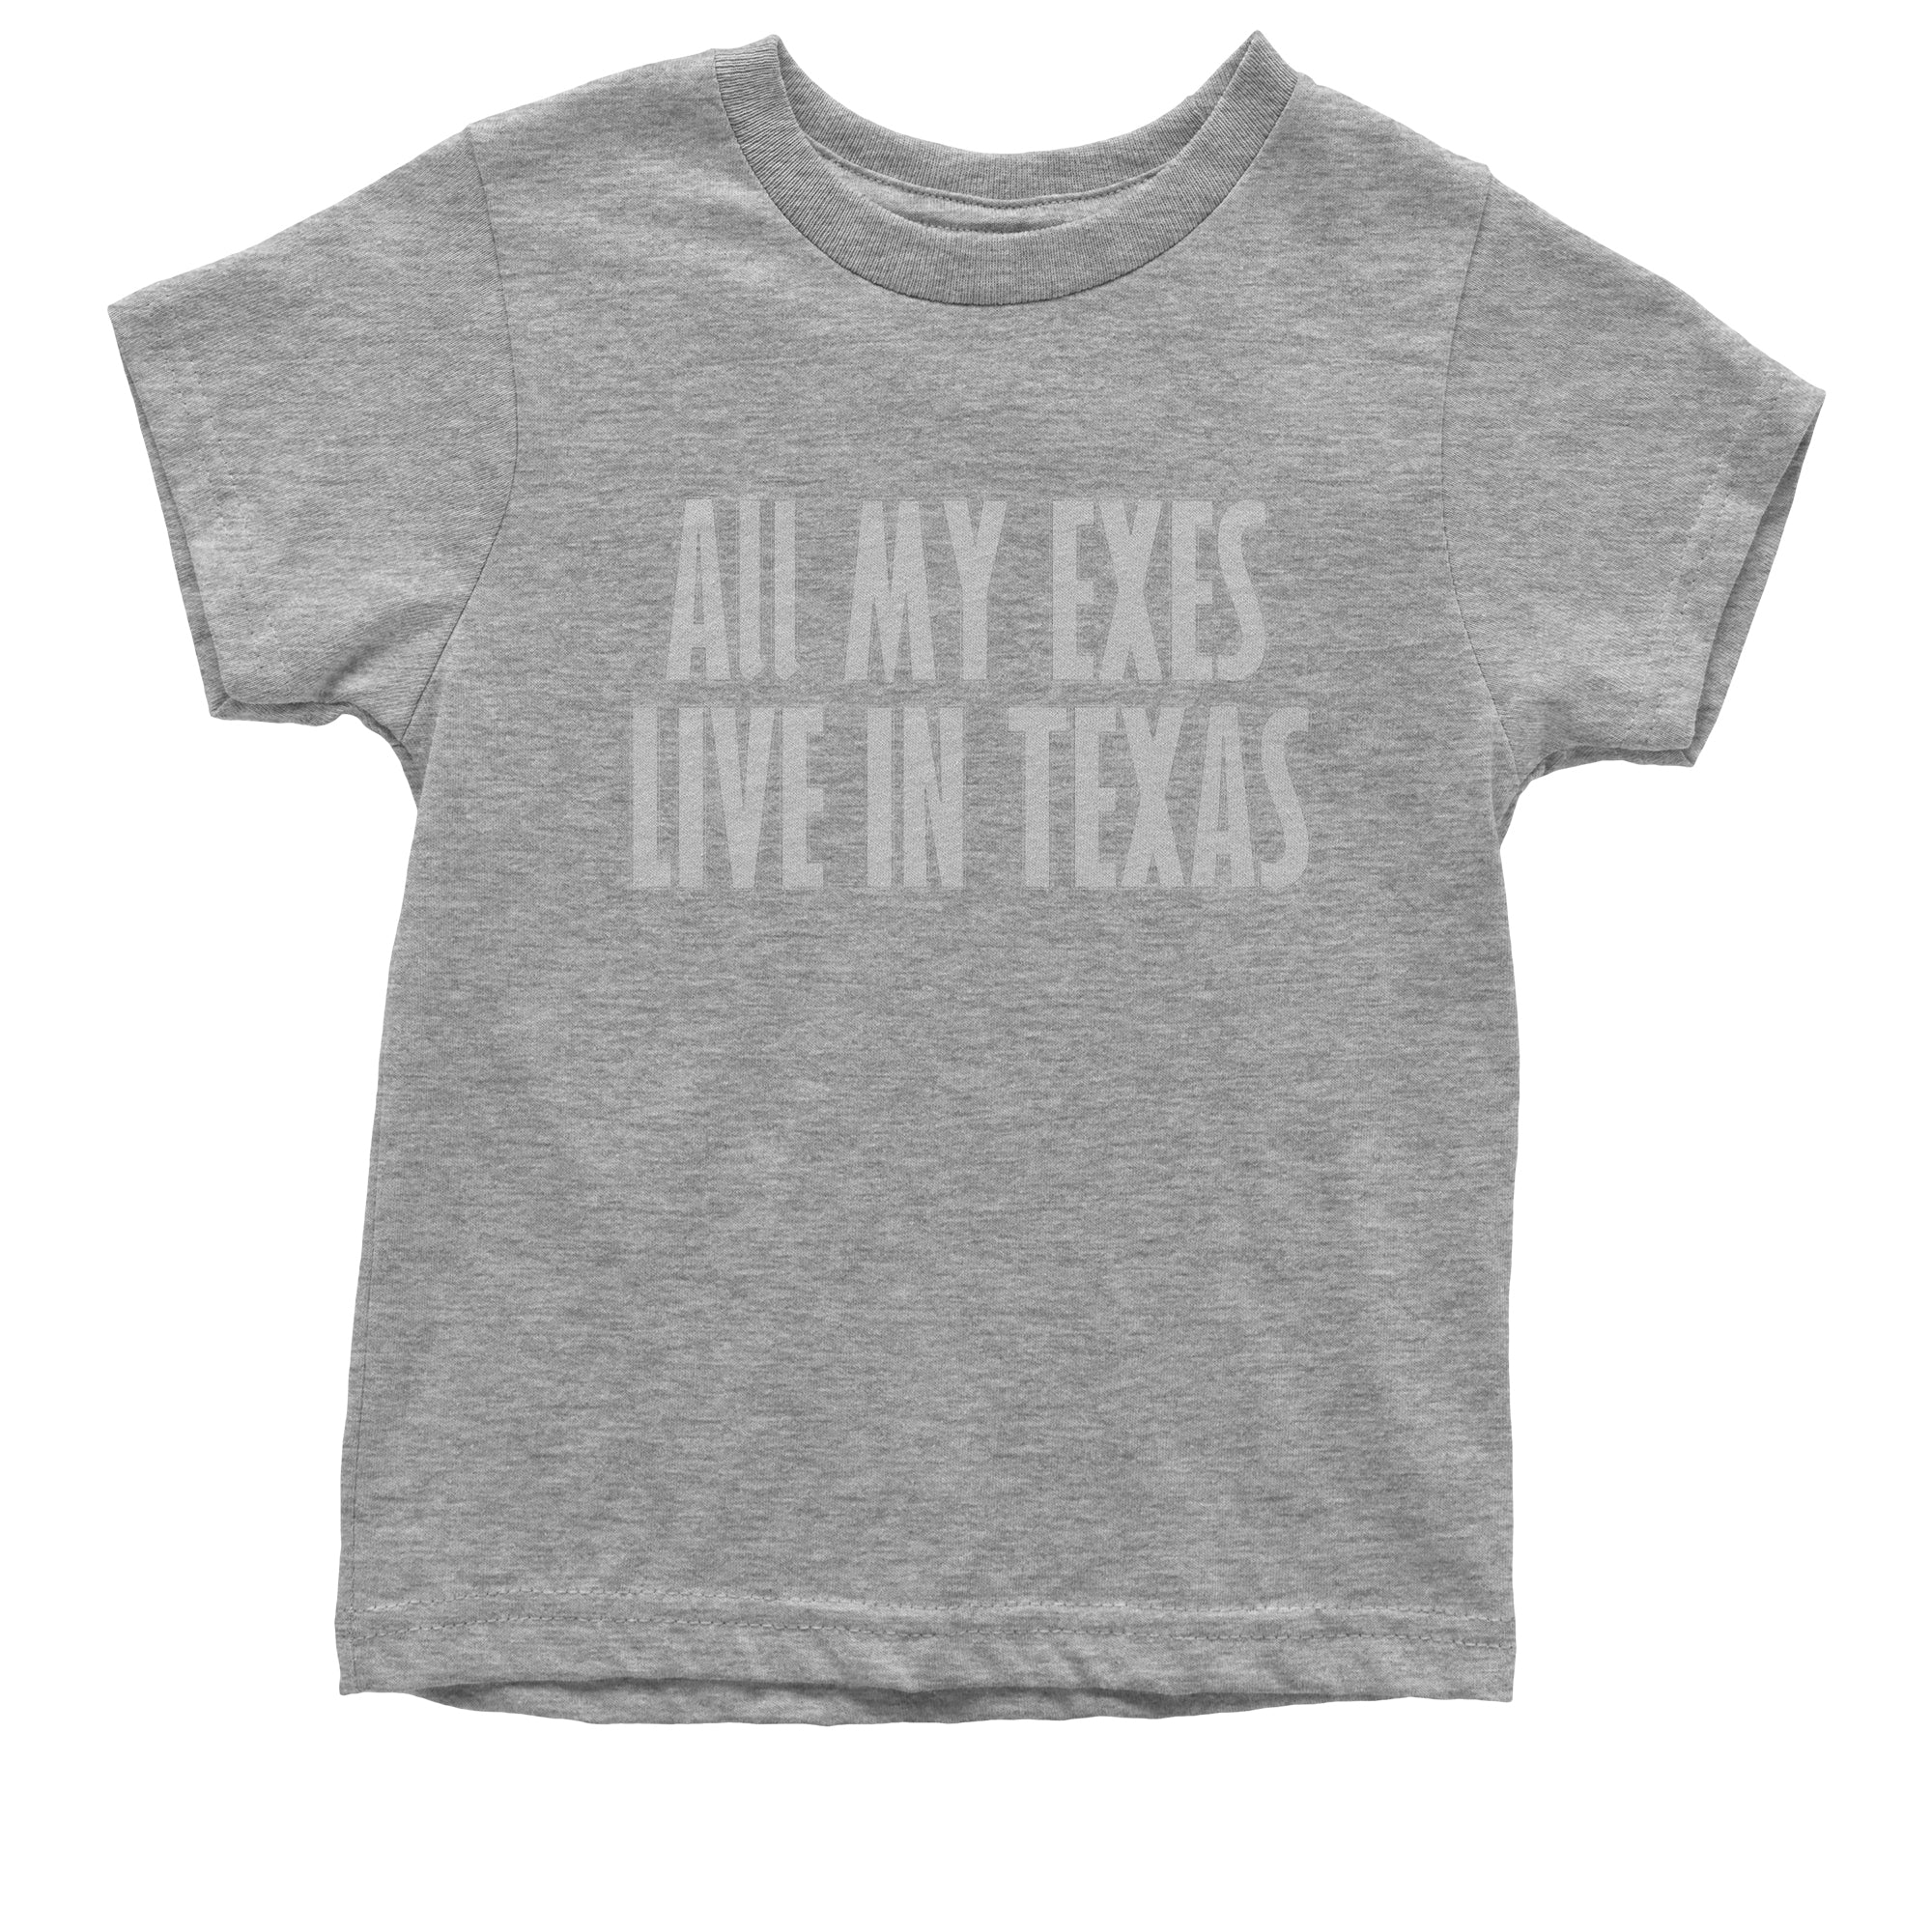 All My Exes Live In Texas Kid's T-Shirt